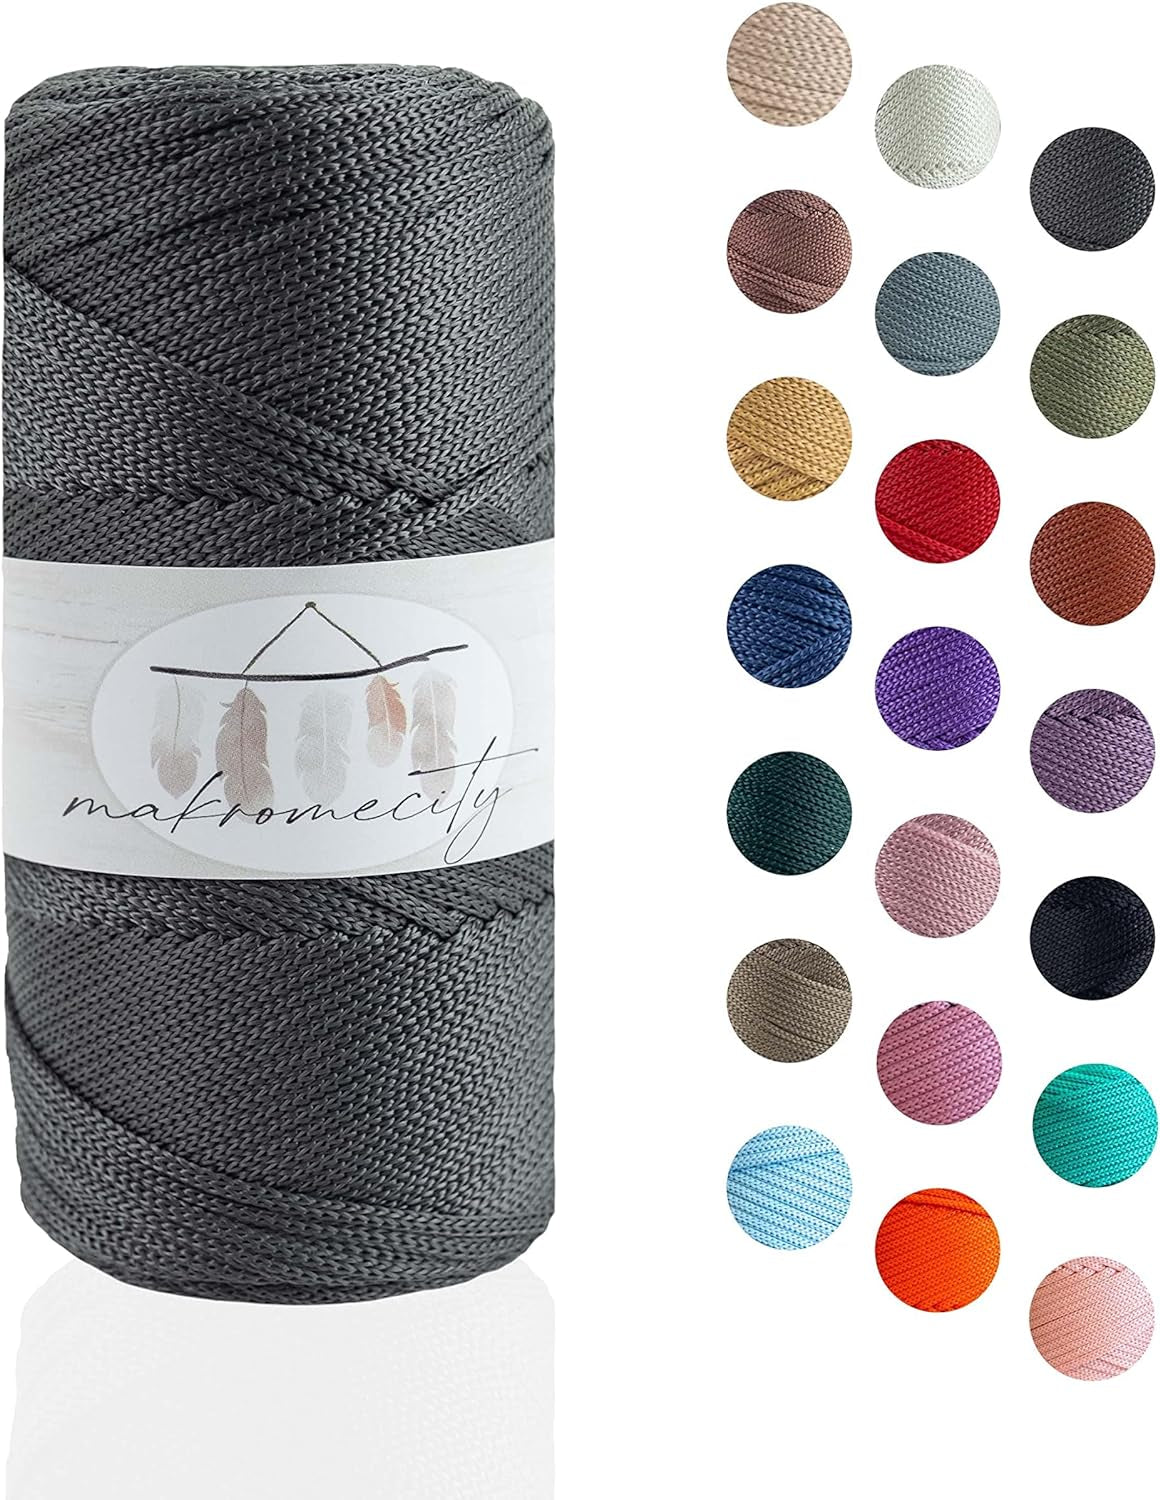 , Polyester Macrame Cord 2Mm X 125 Yards (375 Feet) 2Mm Polypropylene Anthracite Macrame Cord Crochet Macrame Bag Cord Crafts for Wall Hangings, Bags, Underplate, Rug